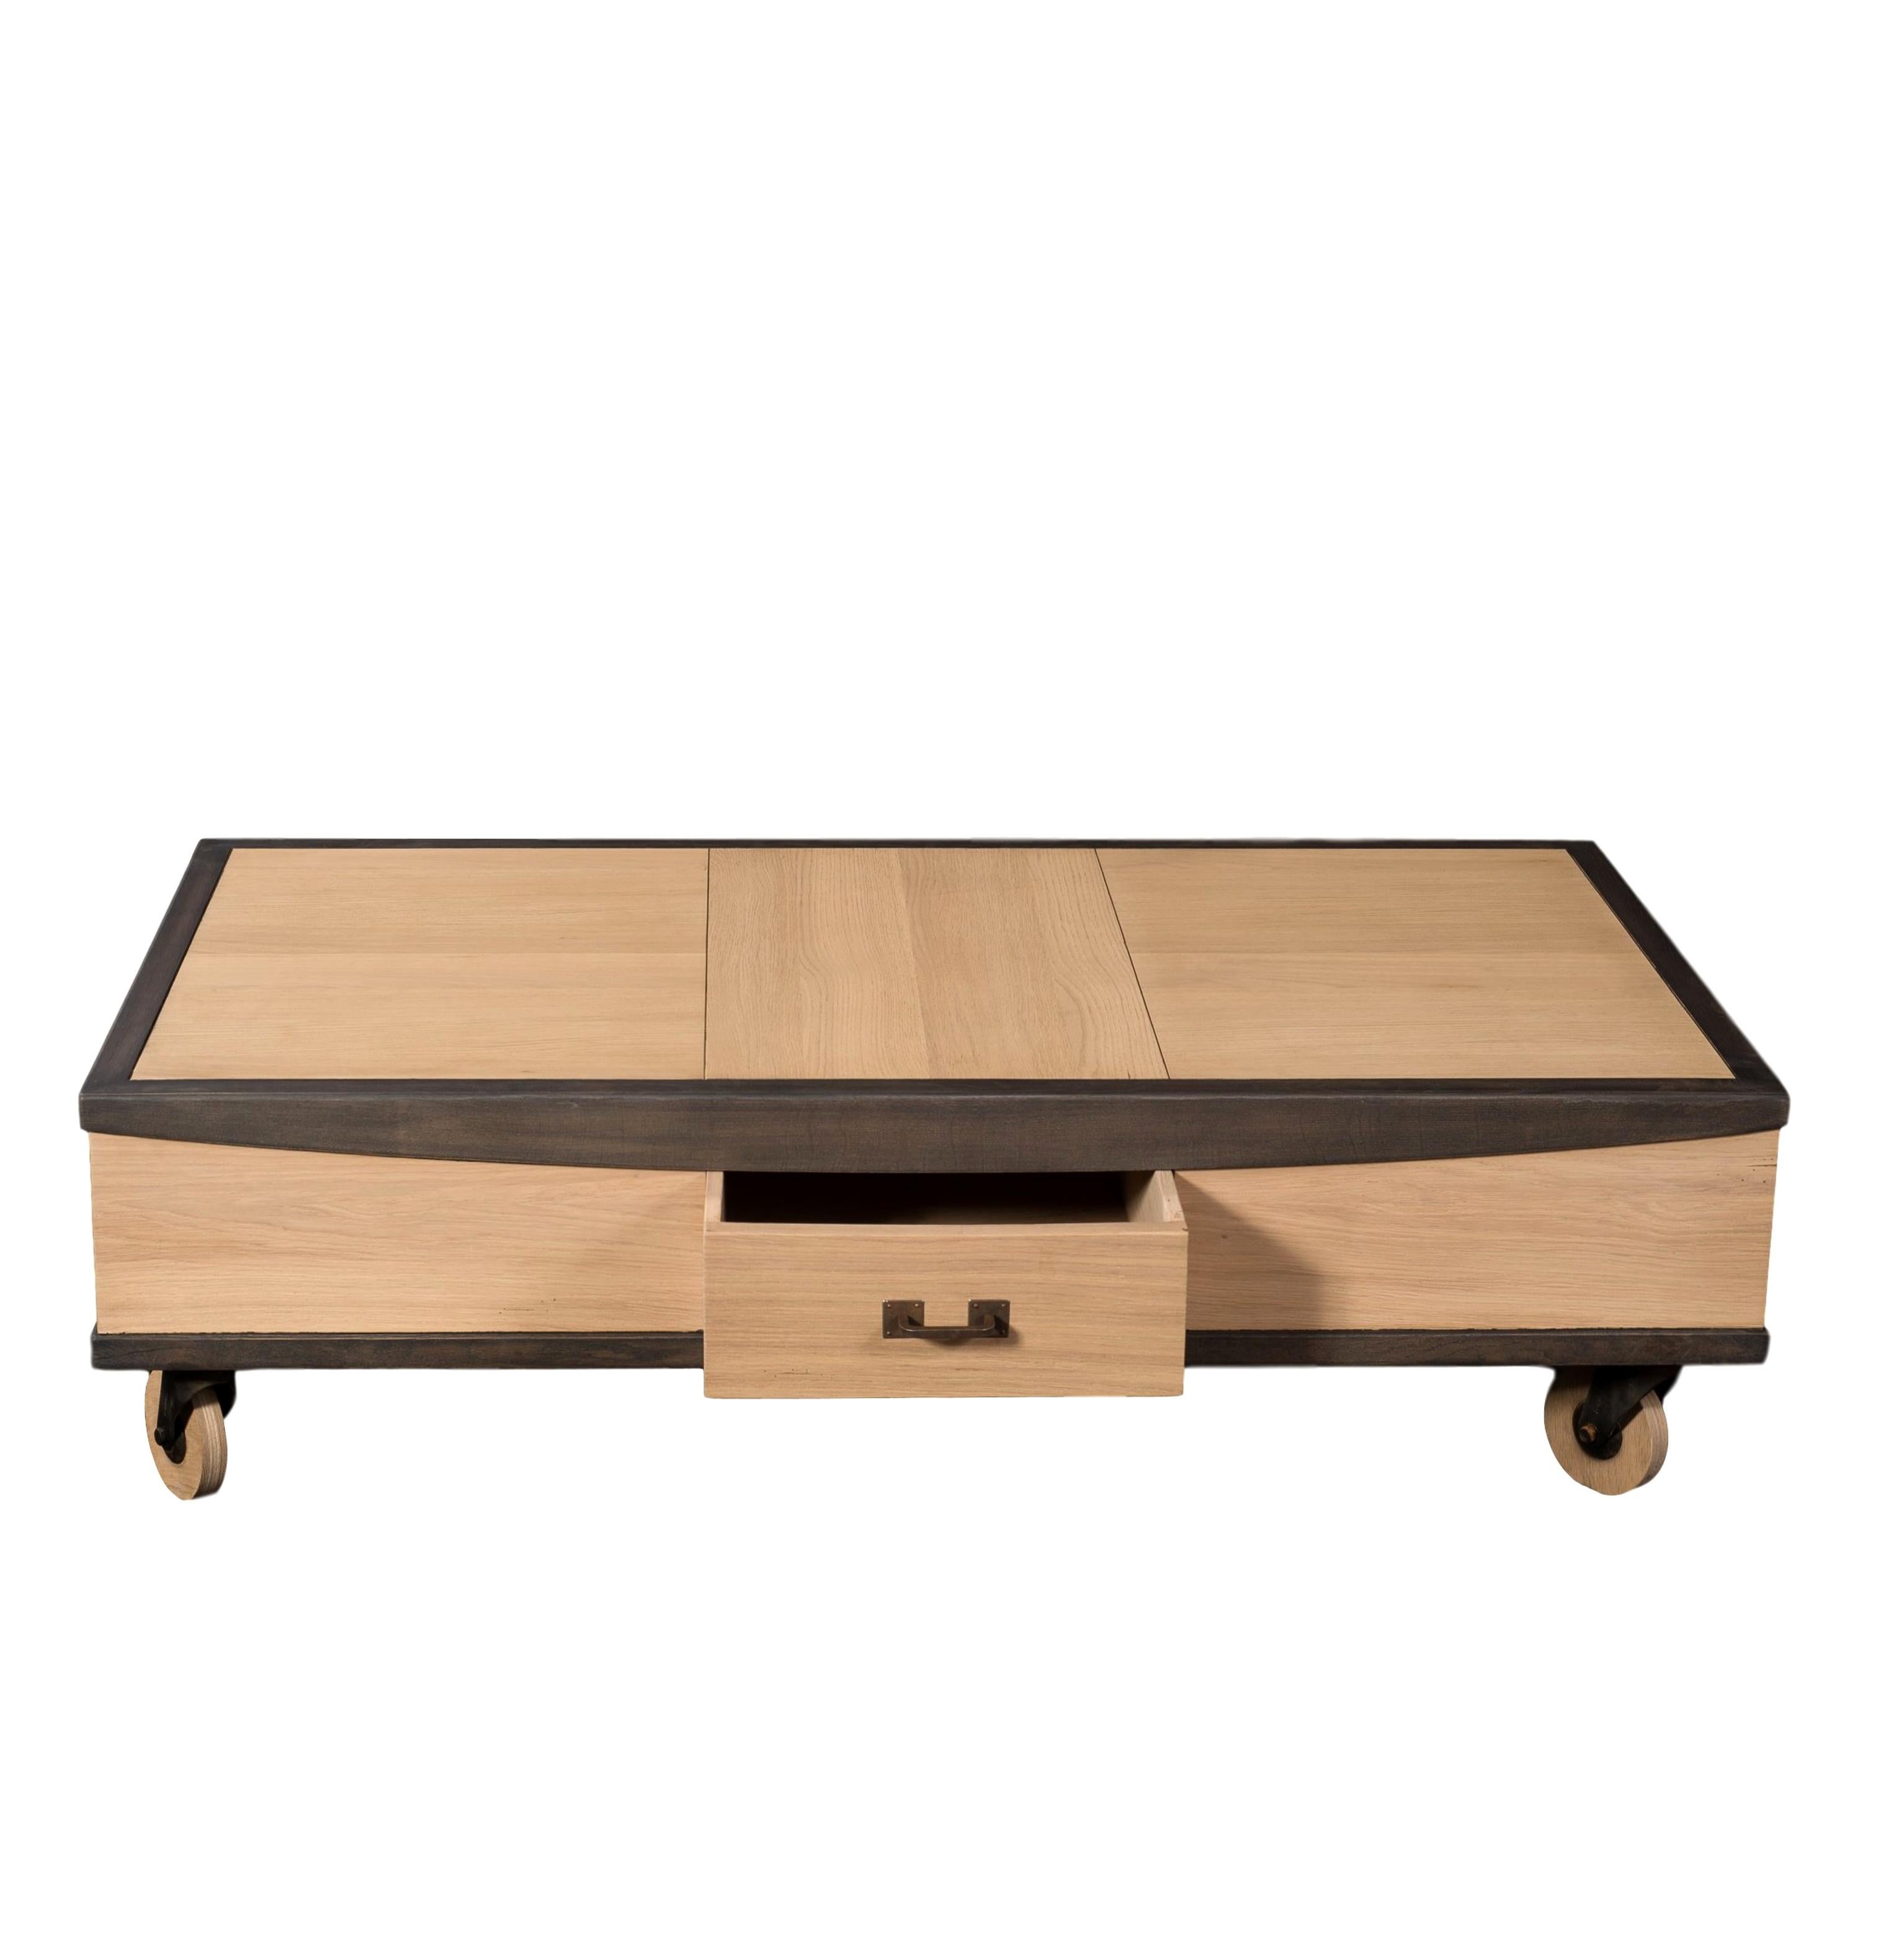 This coffee table is in oak and designed by the French Designer Christophe Lecomte.

The 4 small wheels are in wood 
1 small drawer at the front with a bakc and forth motion
3 layers finish including a whitened oak stain and a stain that